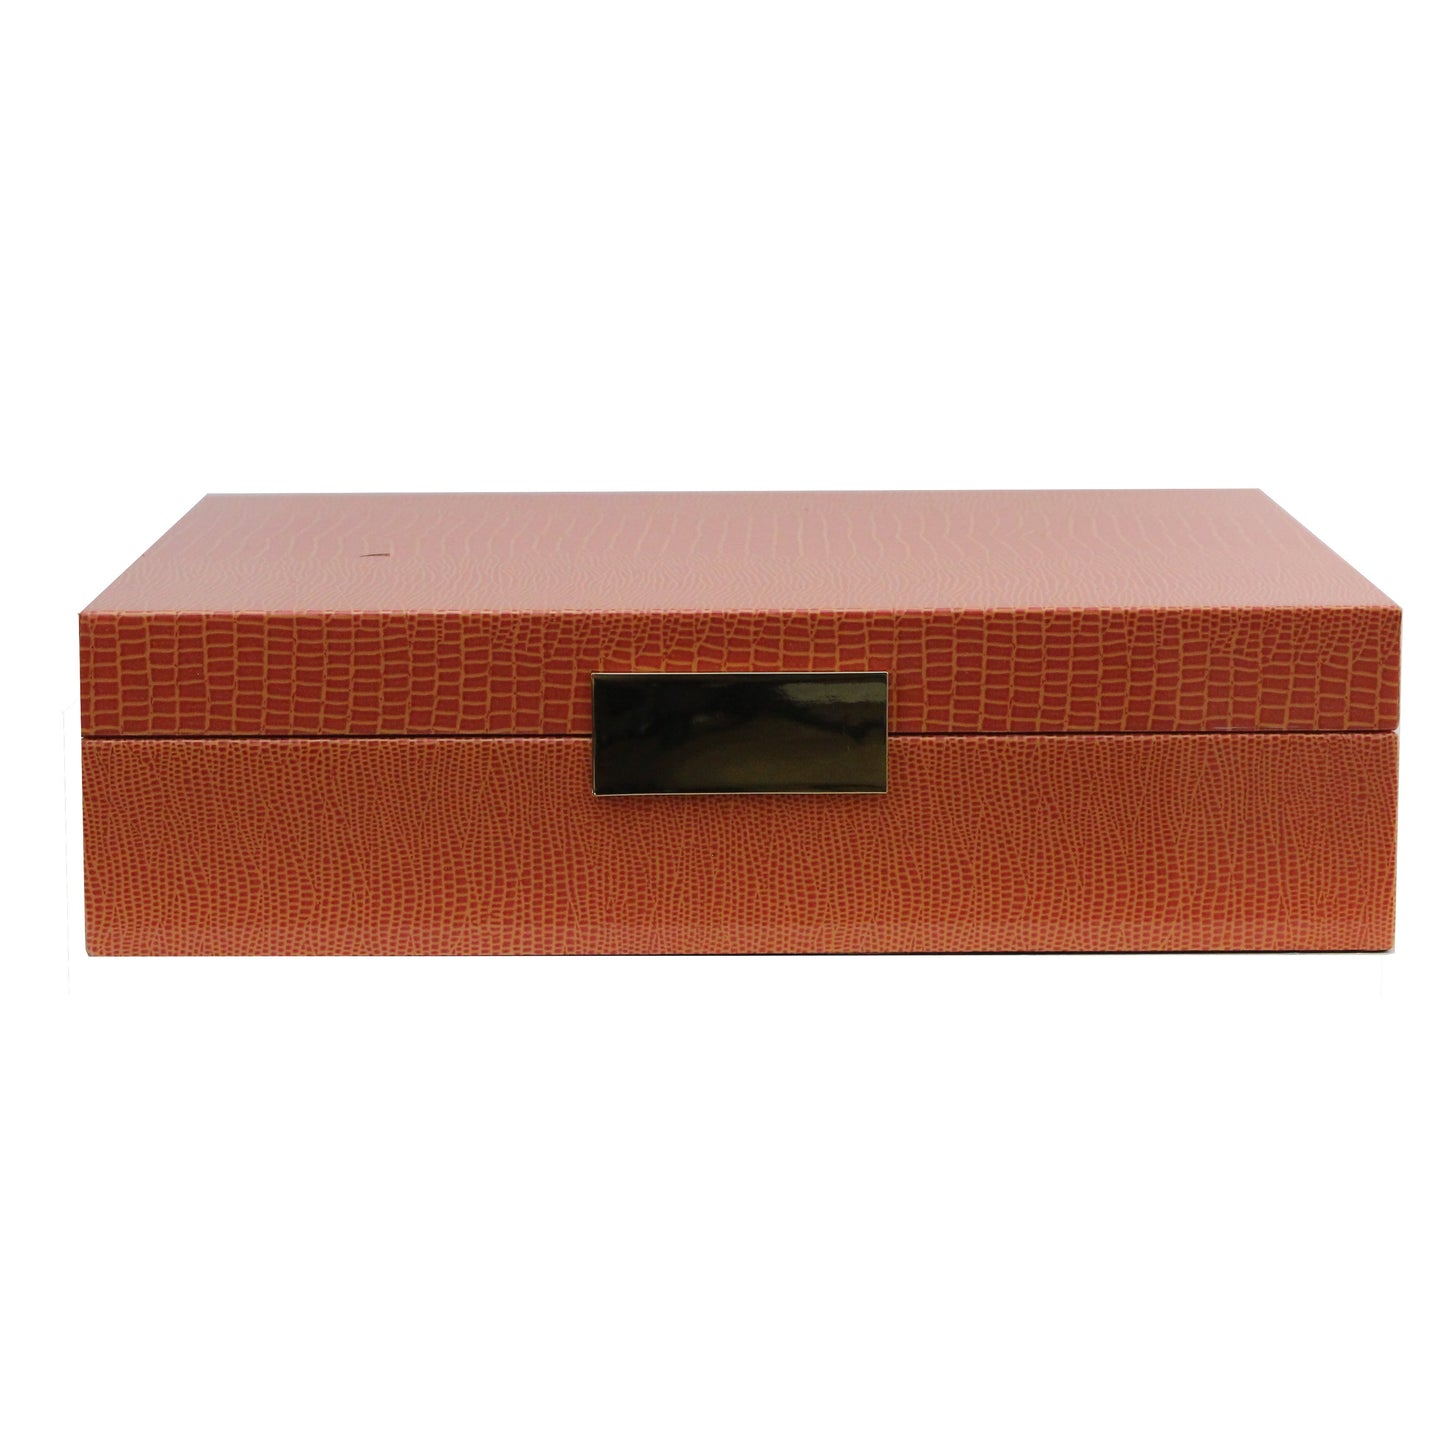 Large Orange Croc Lacquer Box with Gold